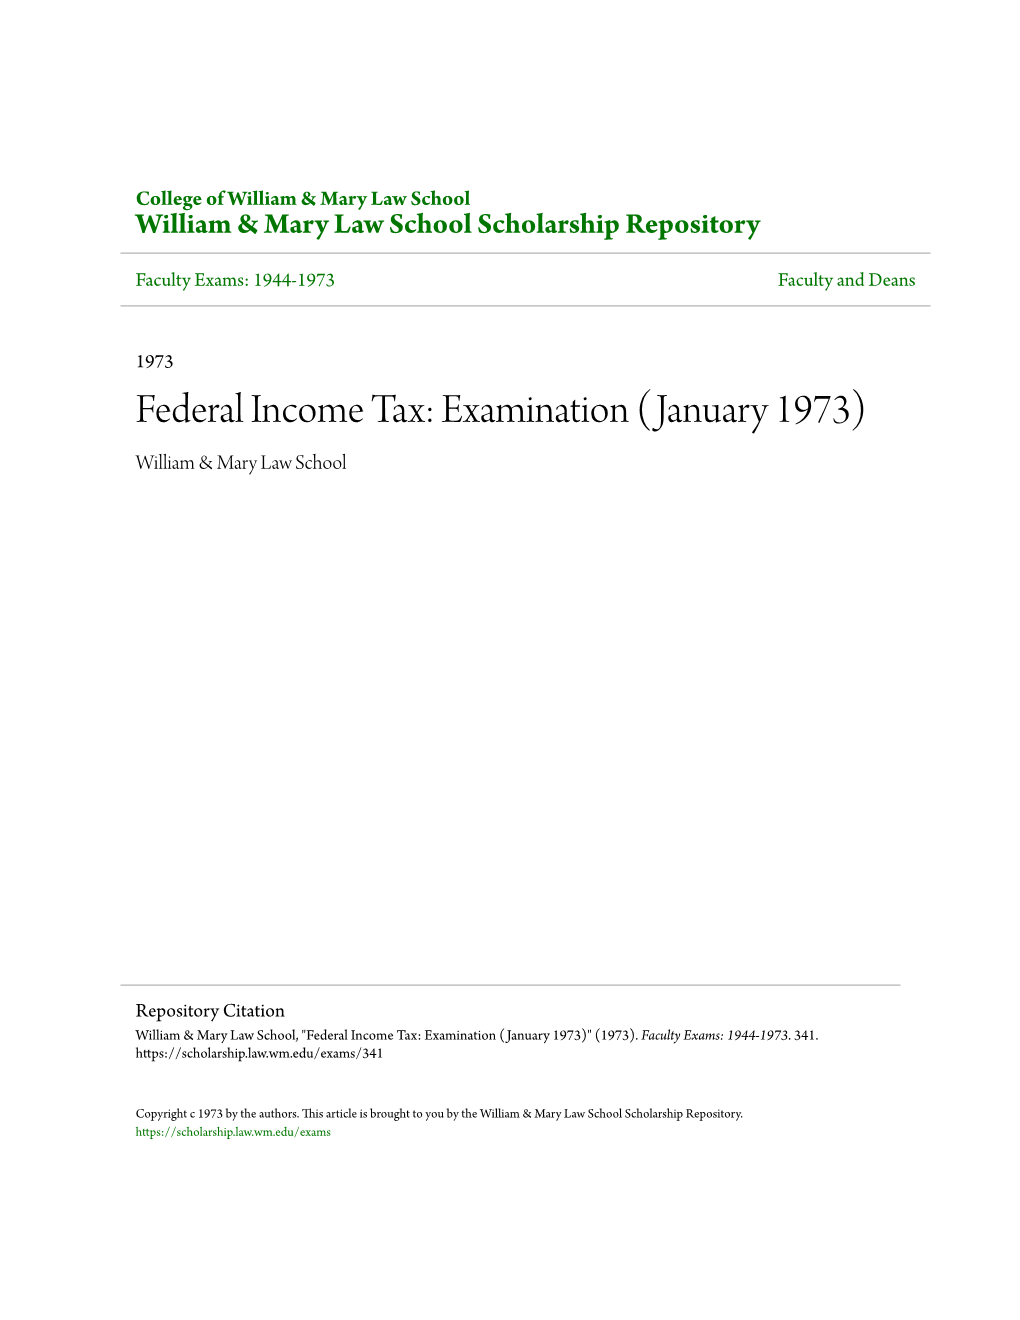 Federal Income Tax: Examination (January 1973) William & Mary Law School